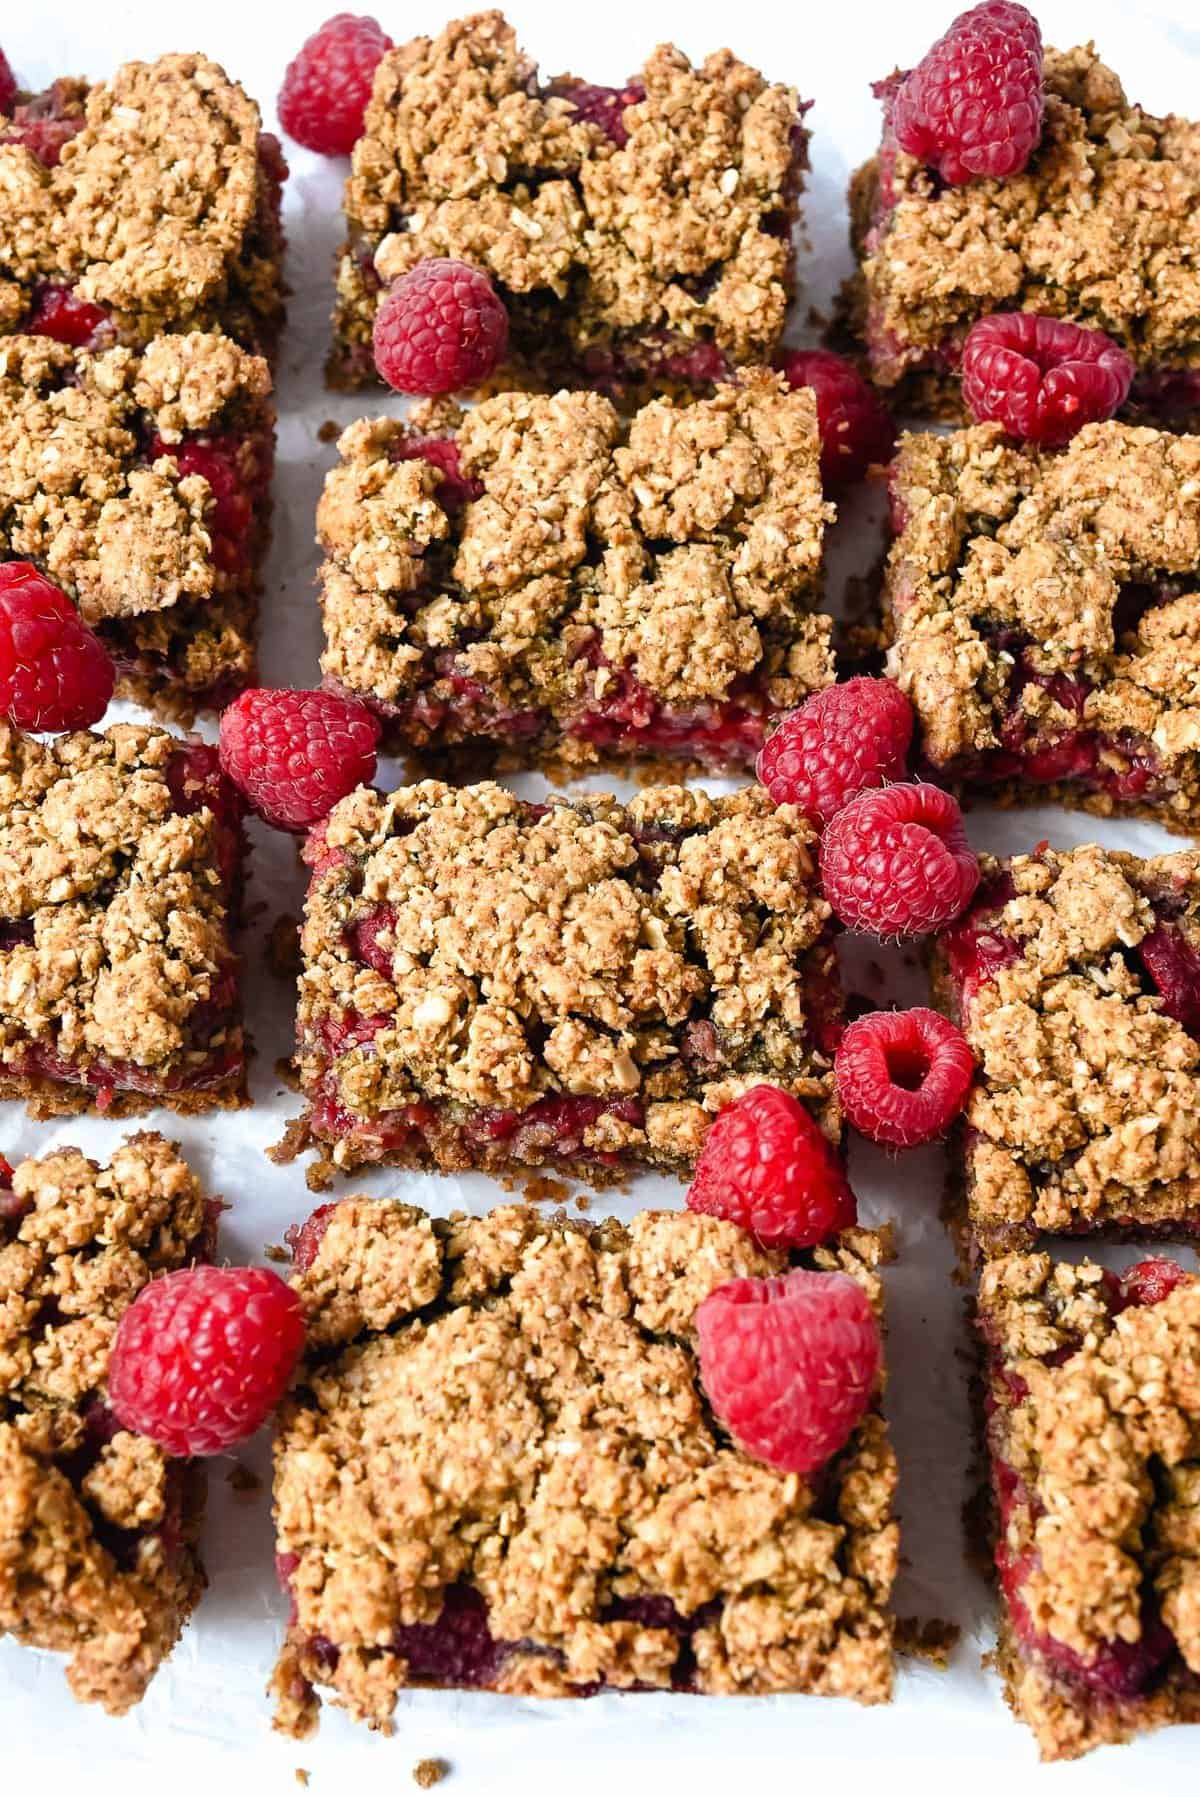 cut up bars topped with raspberries laying on a white surface.